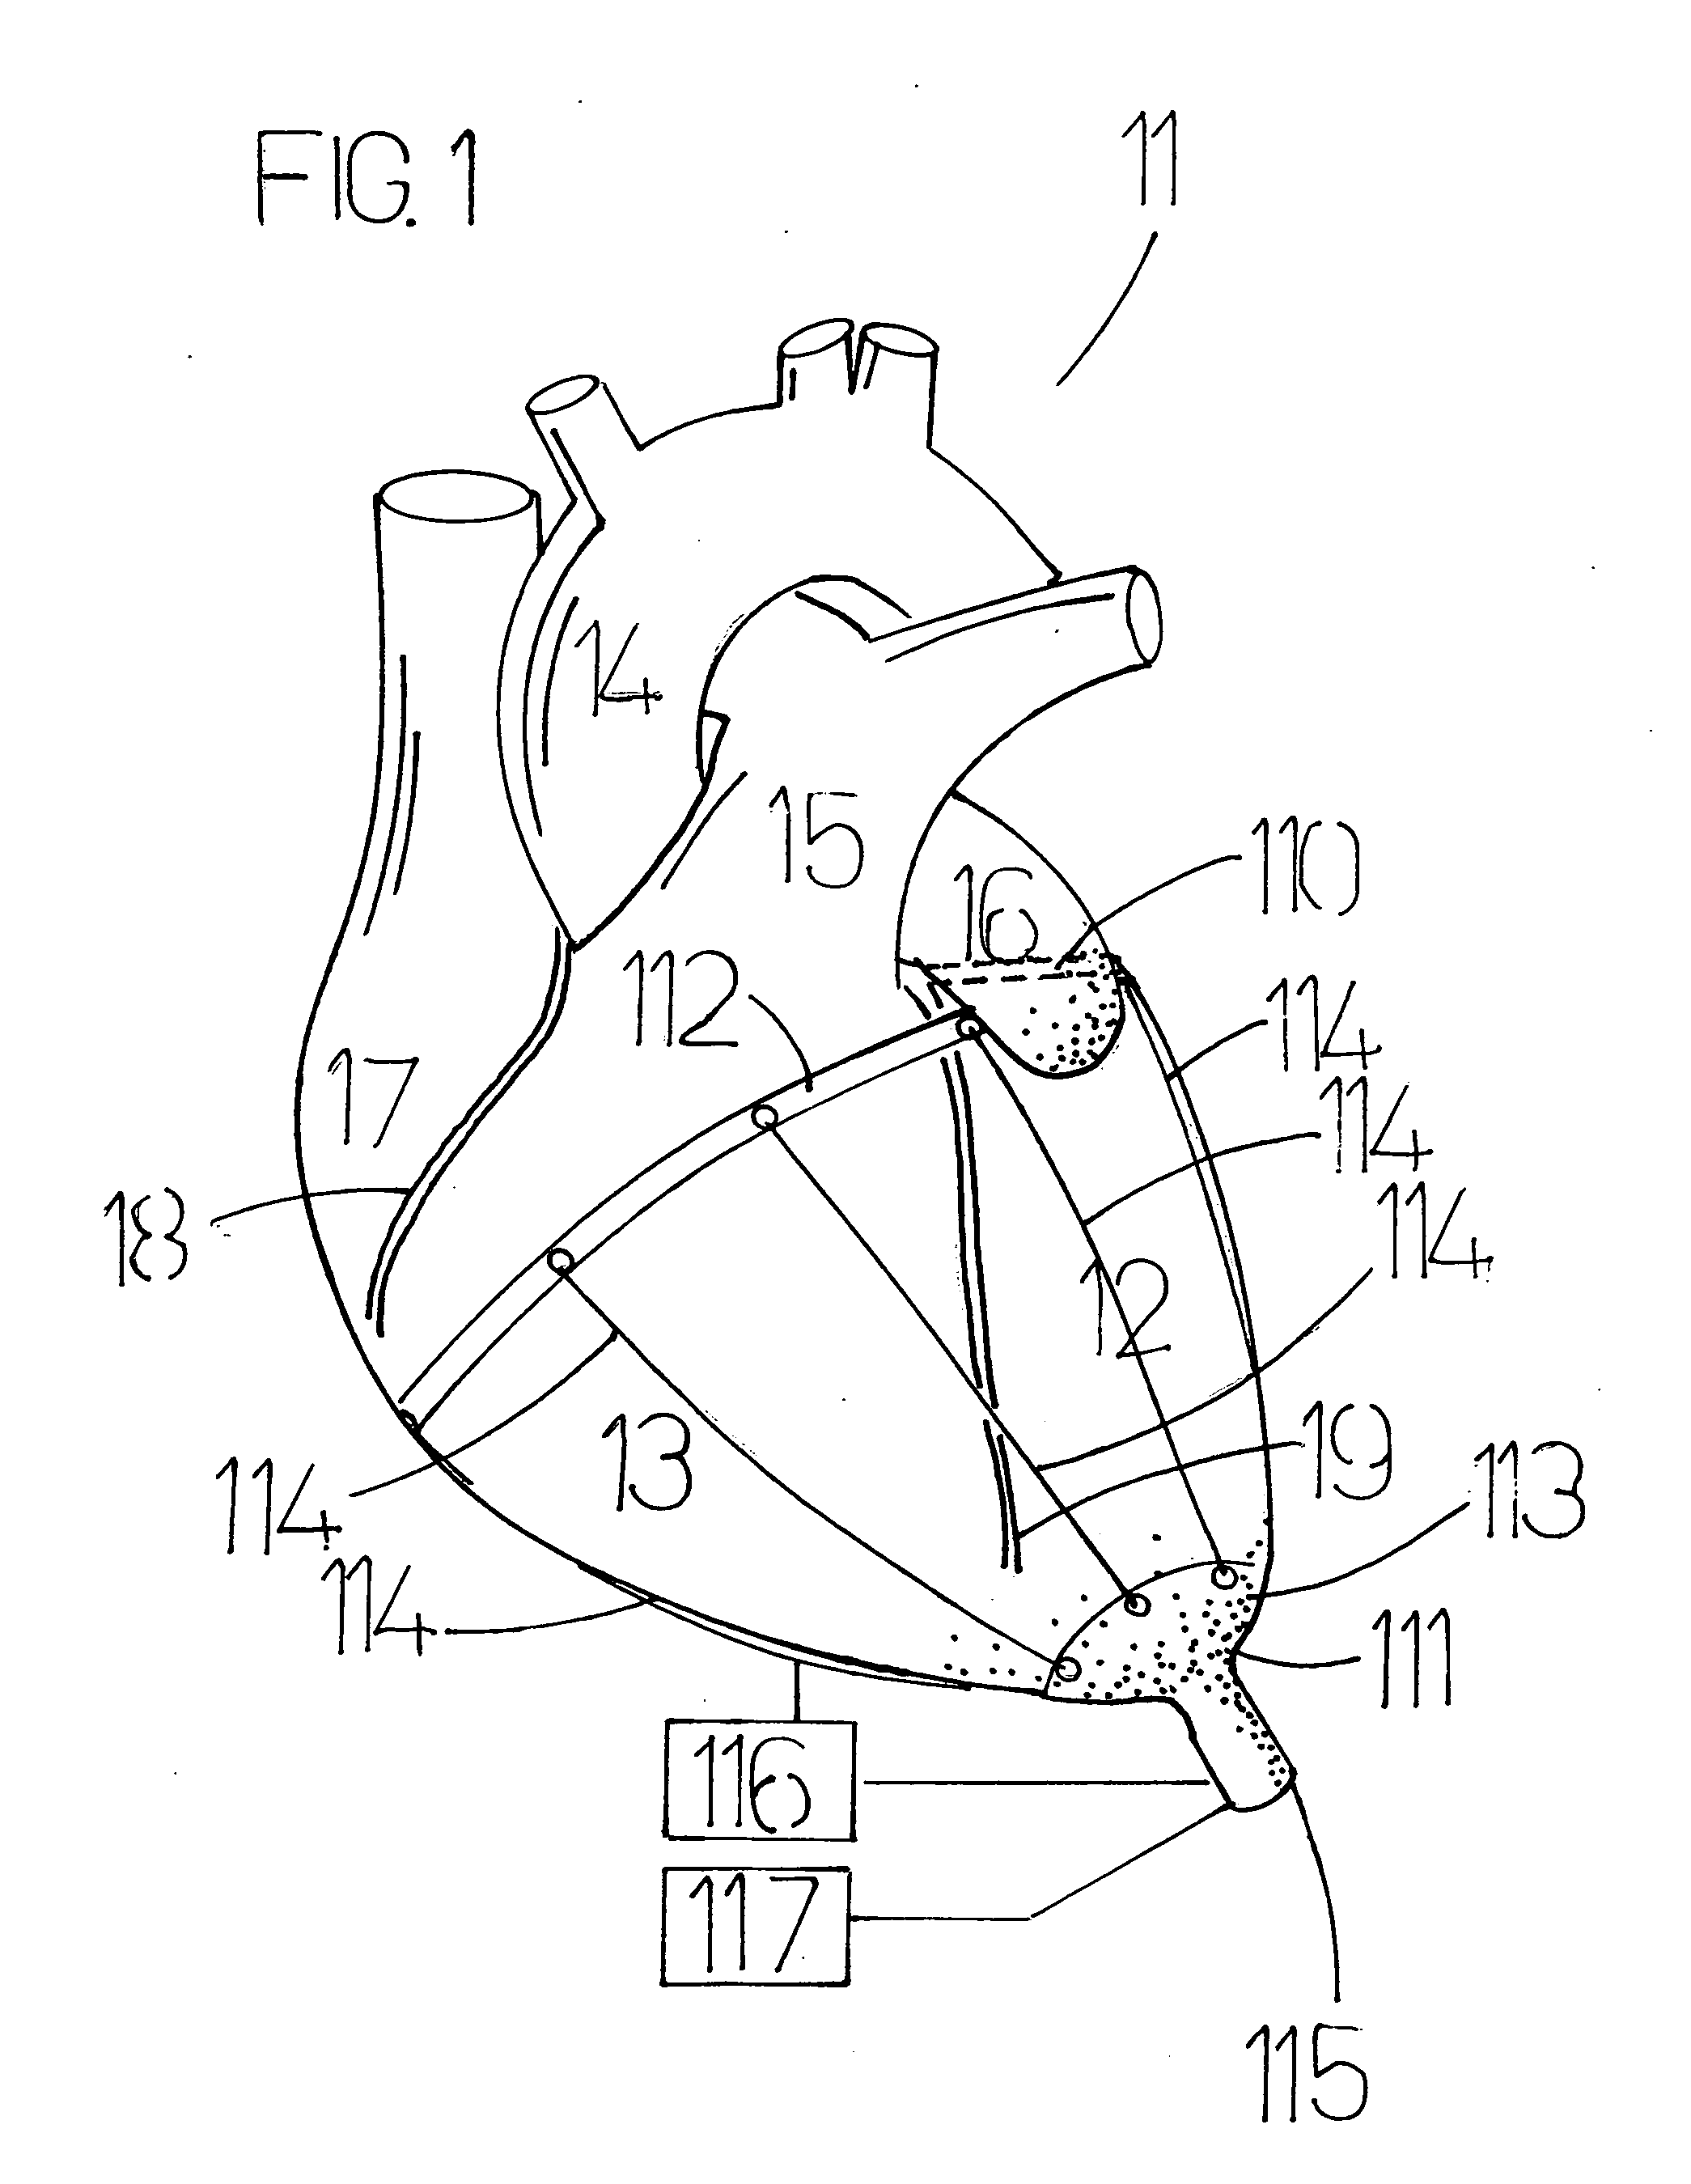 Non-blood contact cardiac compression device, for augmentation of cardiac function by timed cyclic tensioning of elastic cords in an epicardial location